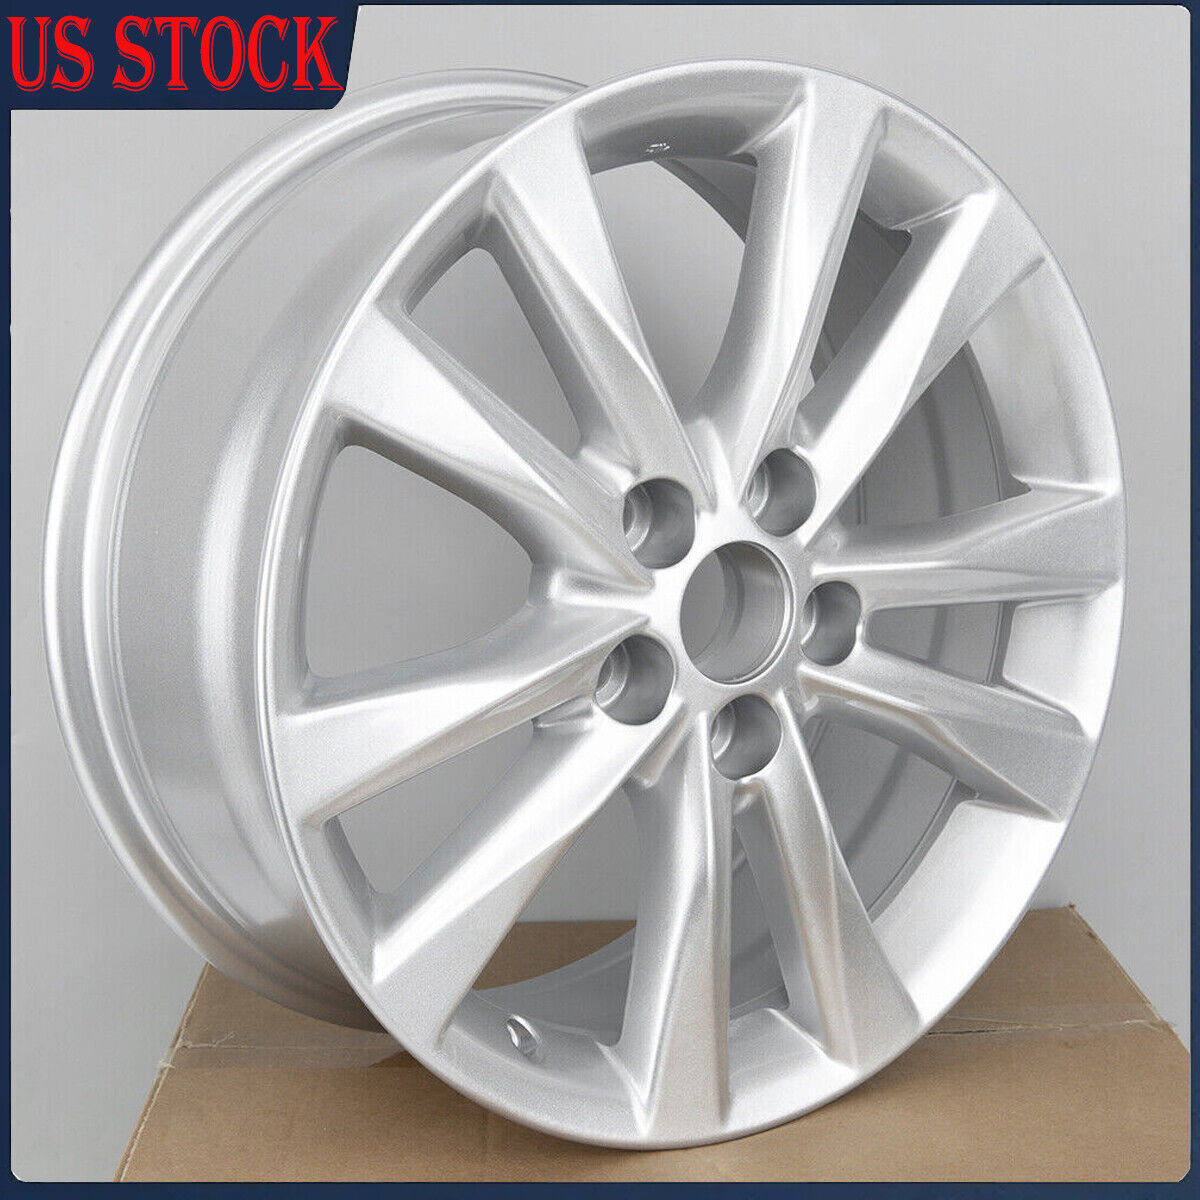 For 2006-2008 Lexus IS250 IS350 New 17 x 7 inch Replacement Wheel Rim Sliver US